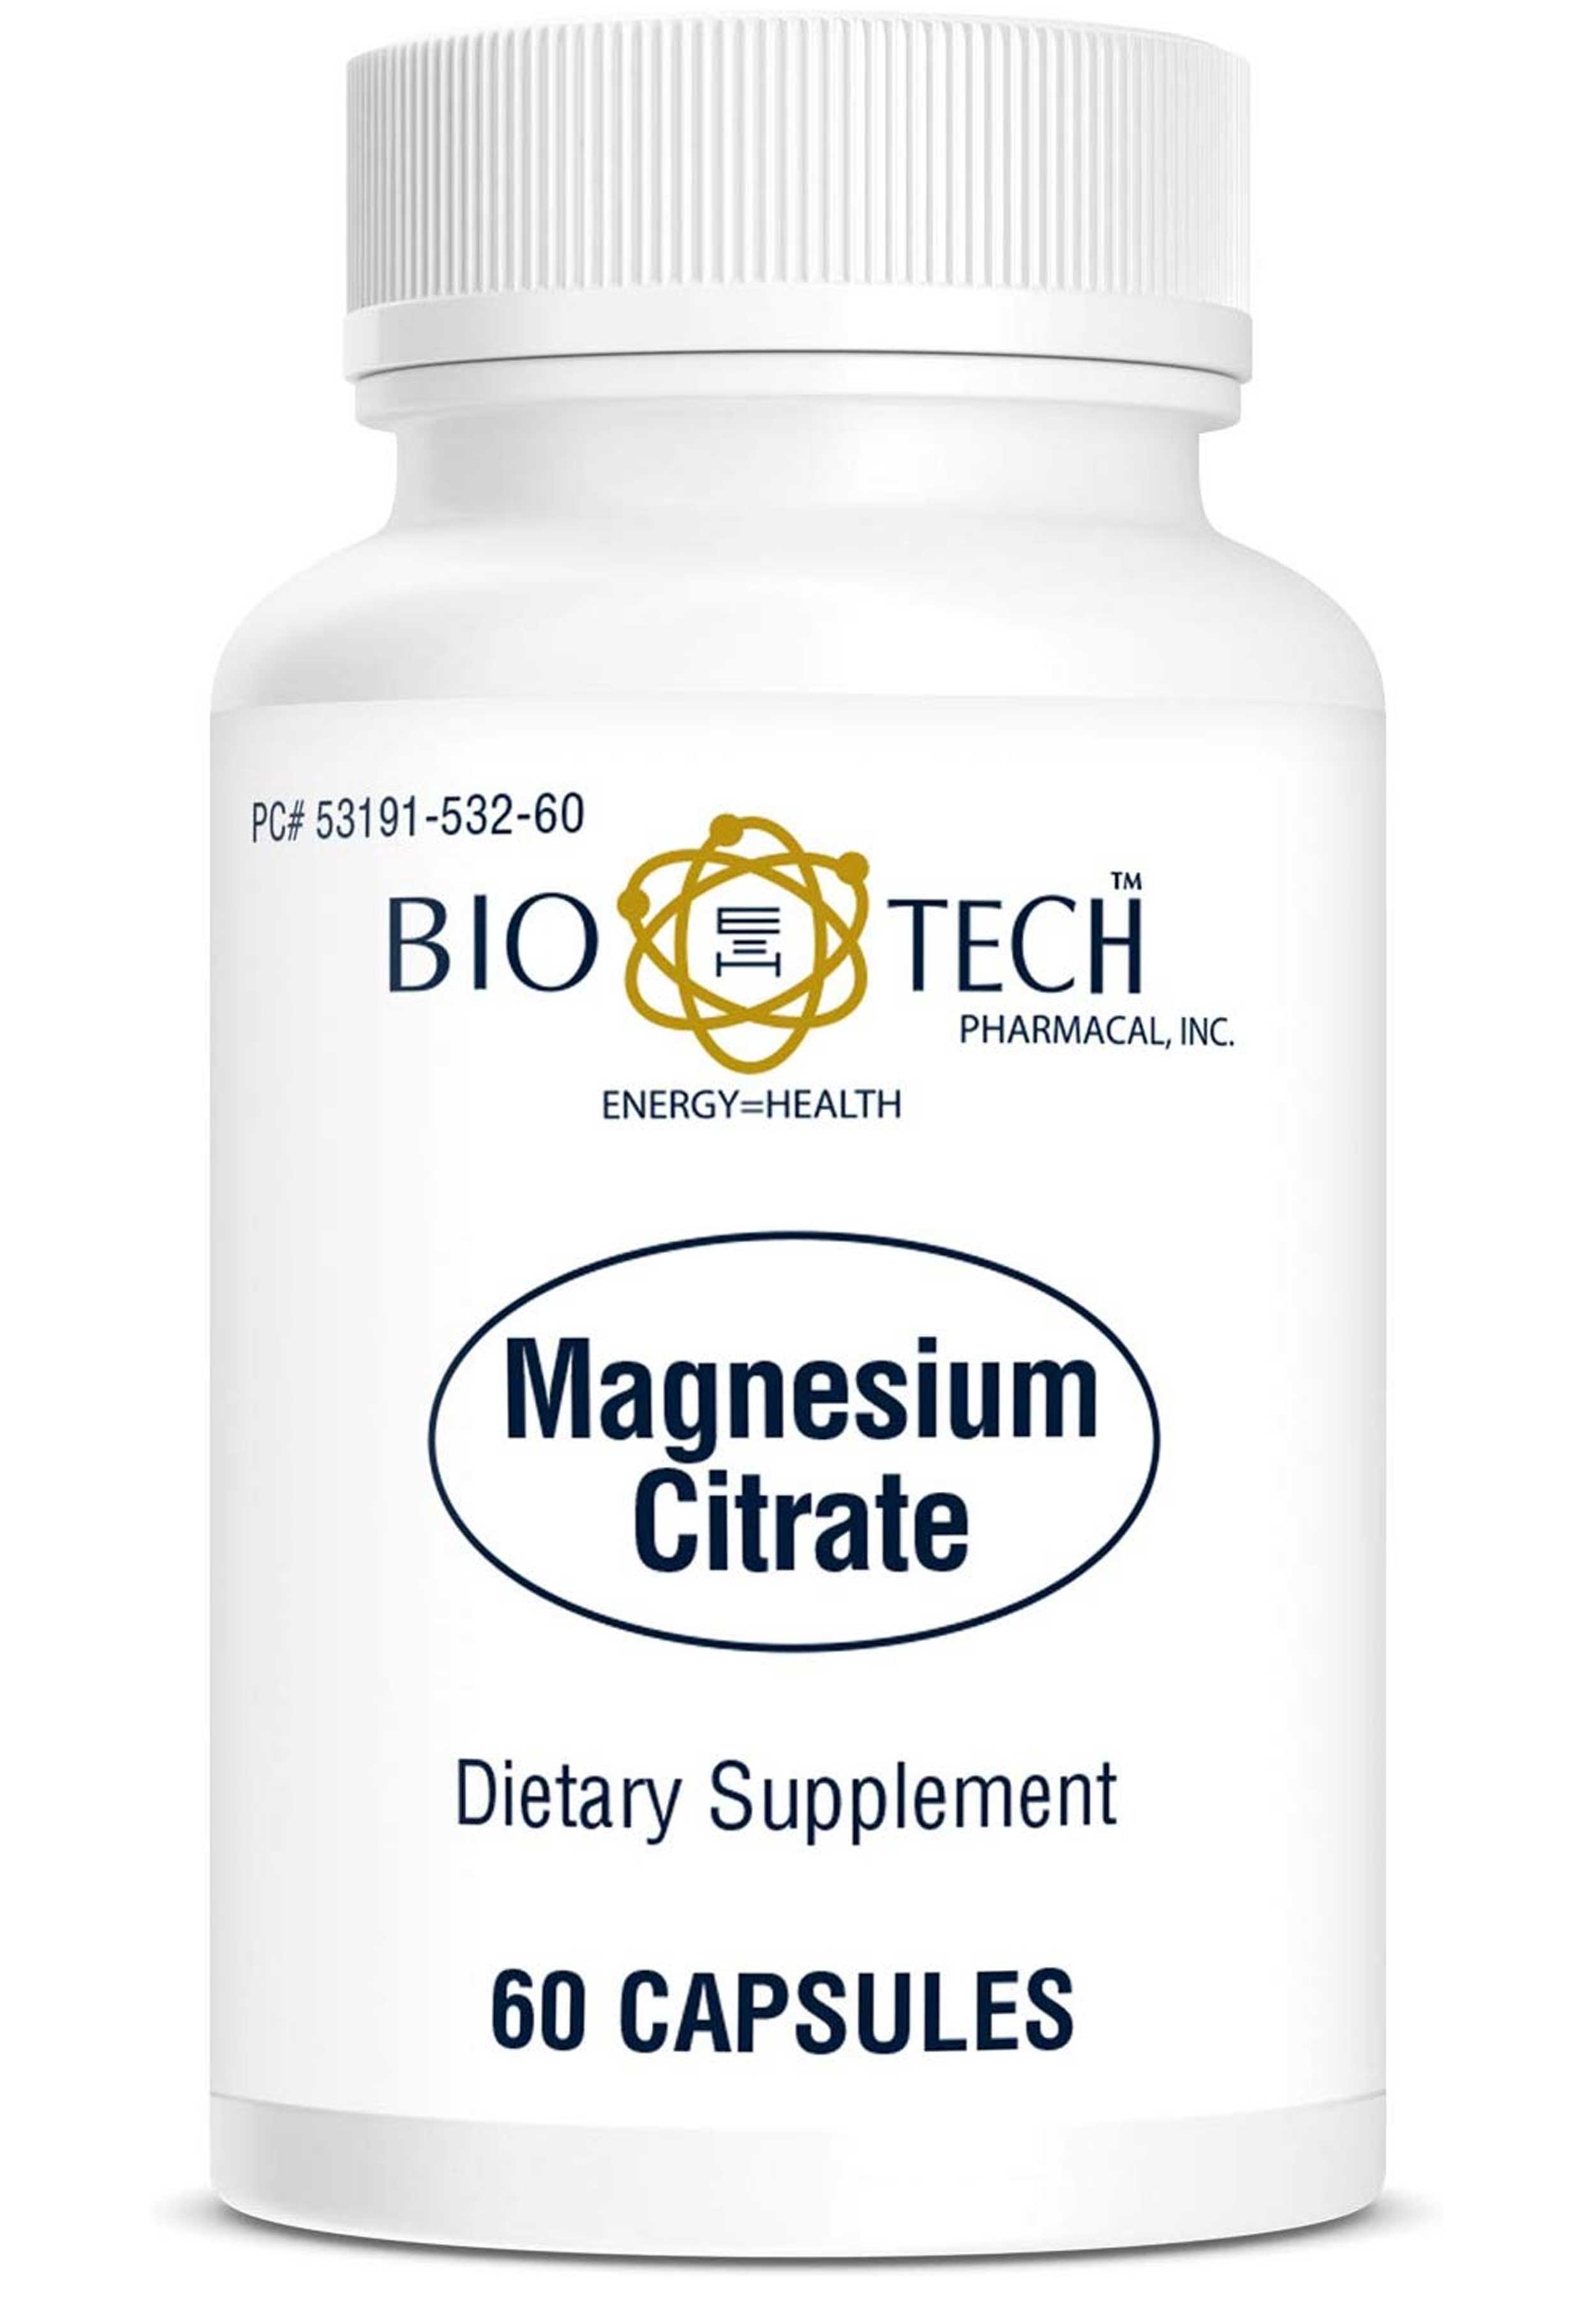 Bio-Tech Pharmacal Magnesium Citrate